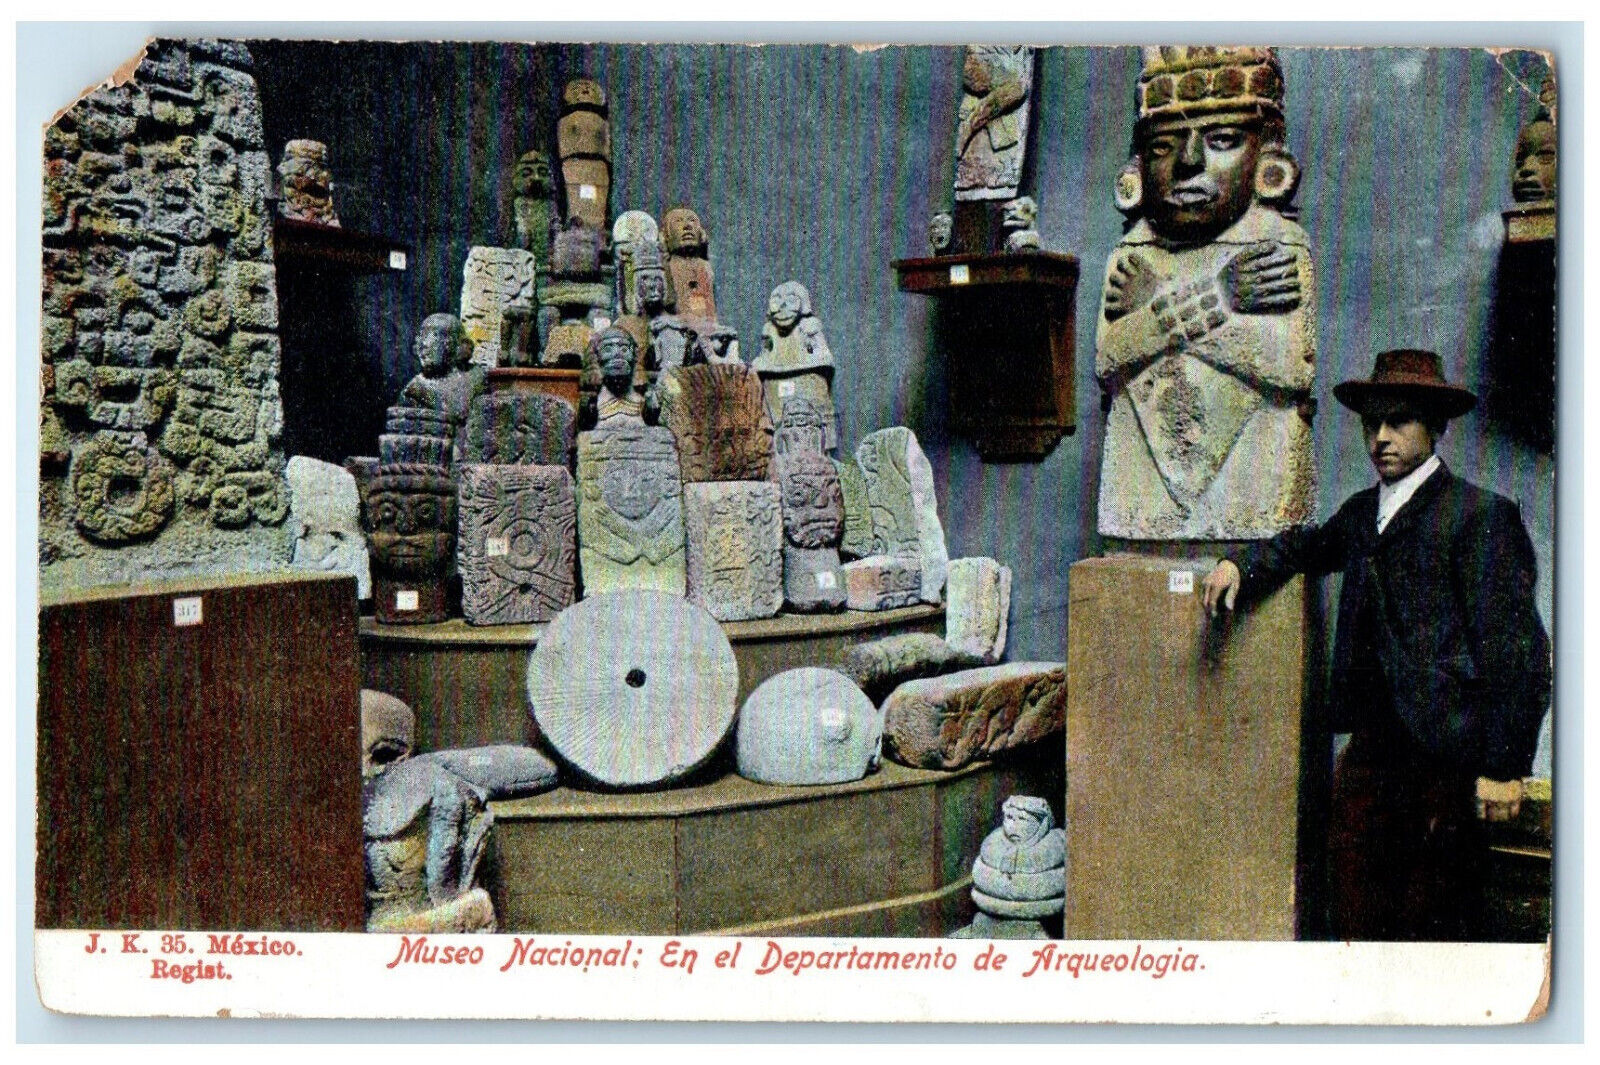 c1905 Statue in National Museum in the Department of Archeology Mexico Postcard